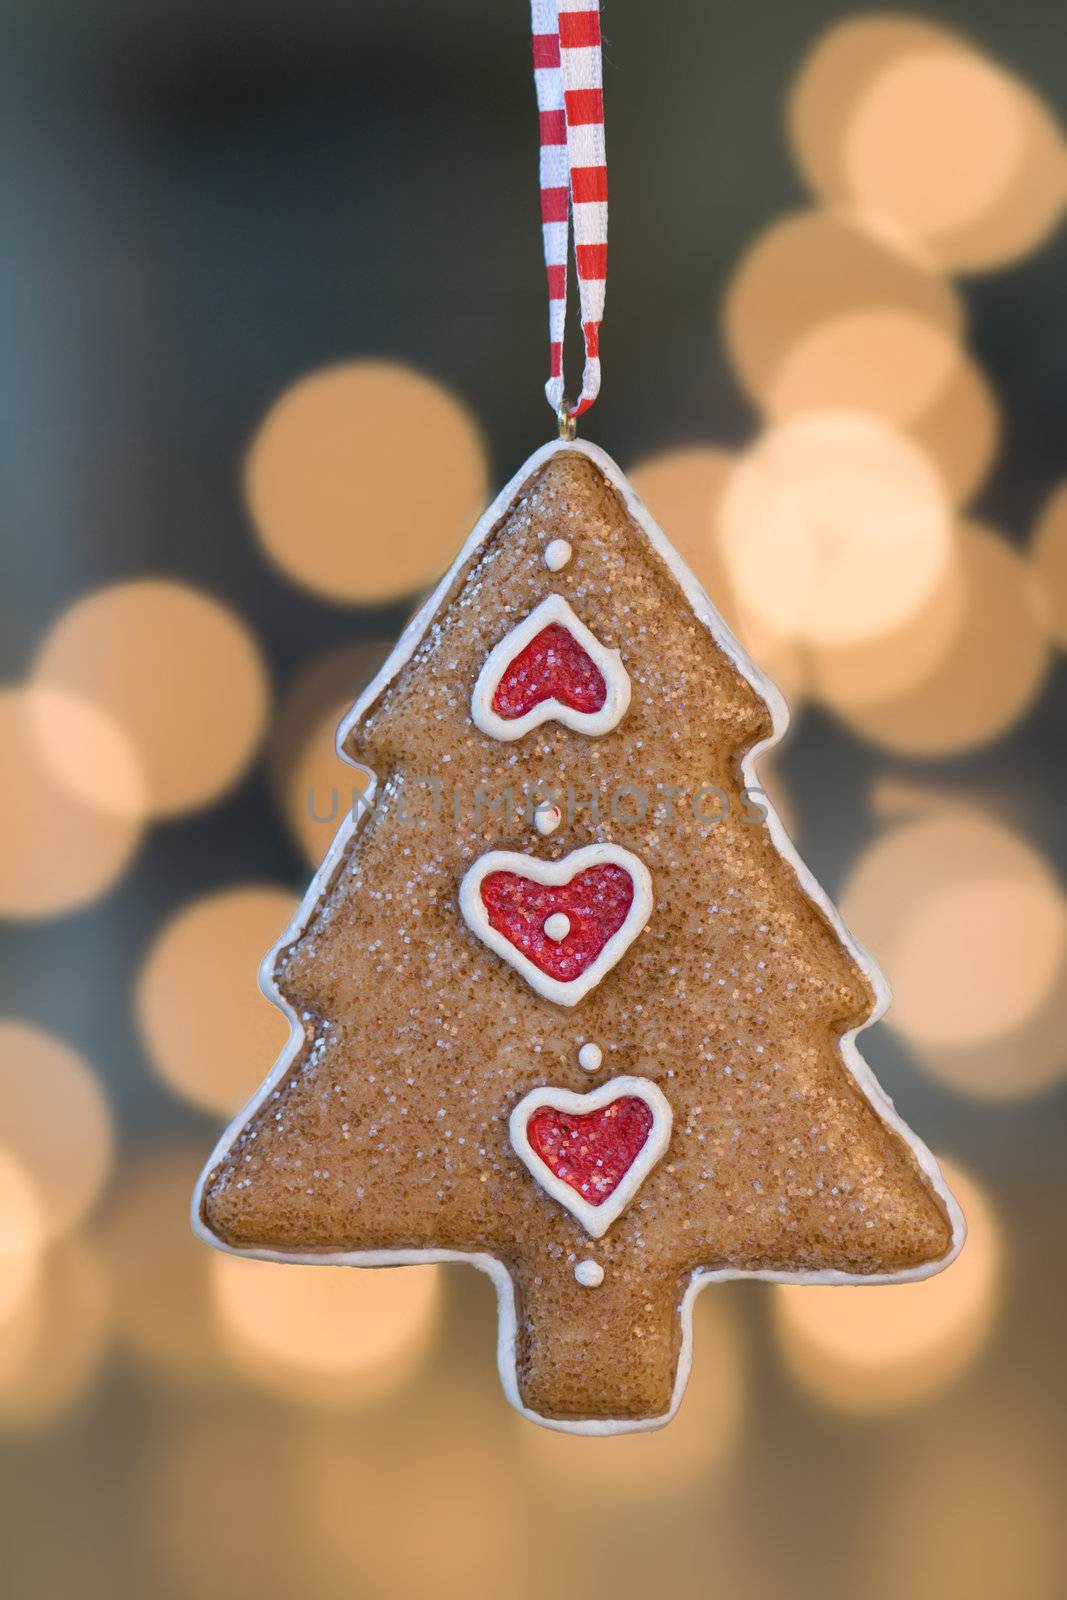 Christmas tree ornament hangs in front of de-focused christmas lights